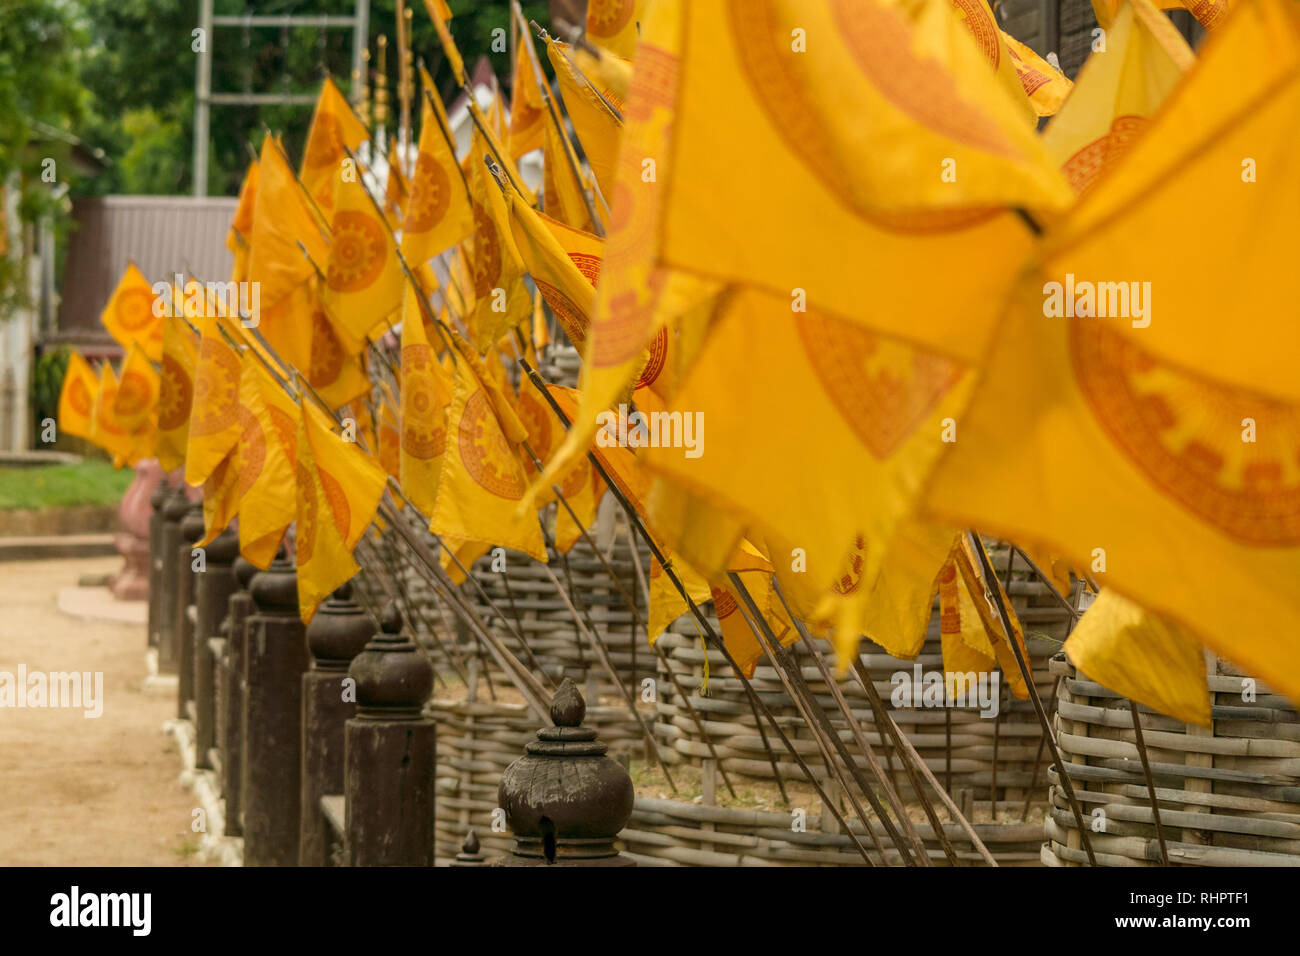 Many Yellow Dhamma Chakka or Wheel of Dhamma Buddhist flags flying at a Buddhist temple in Chiang Mai, Thailand. Stock Photo